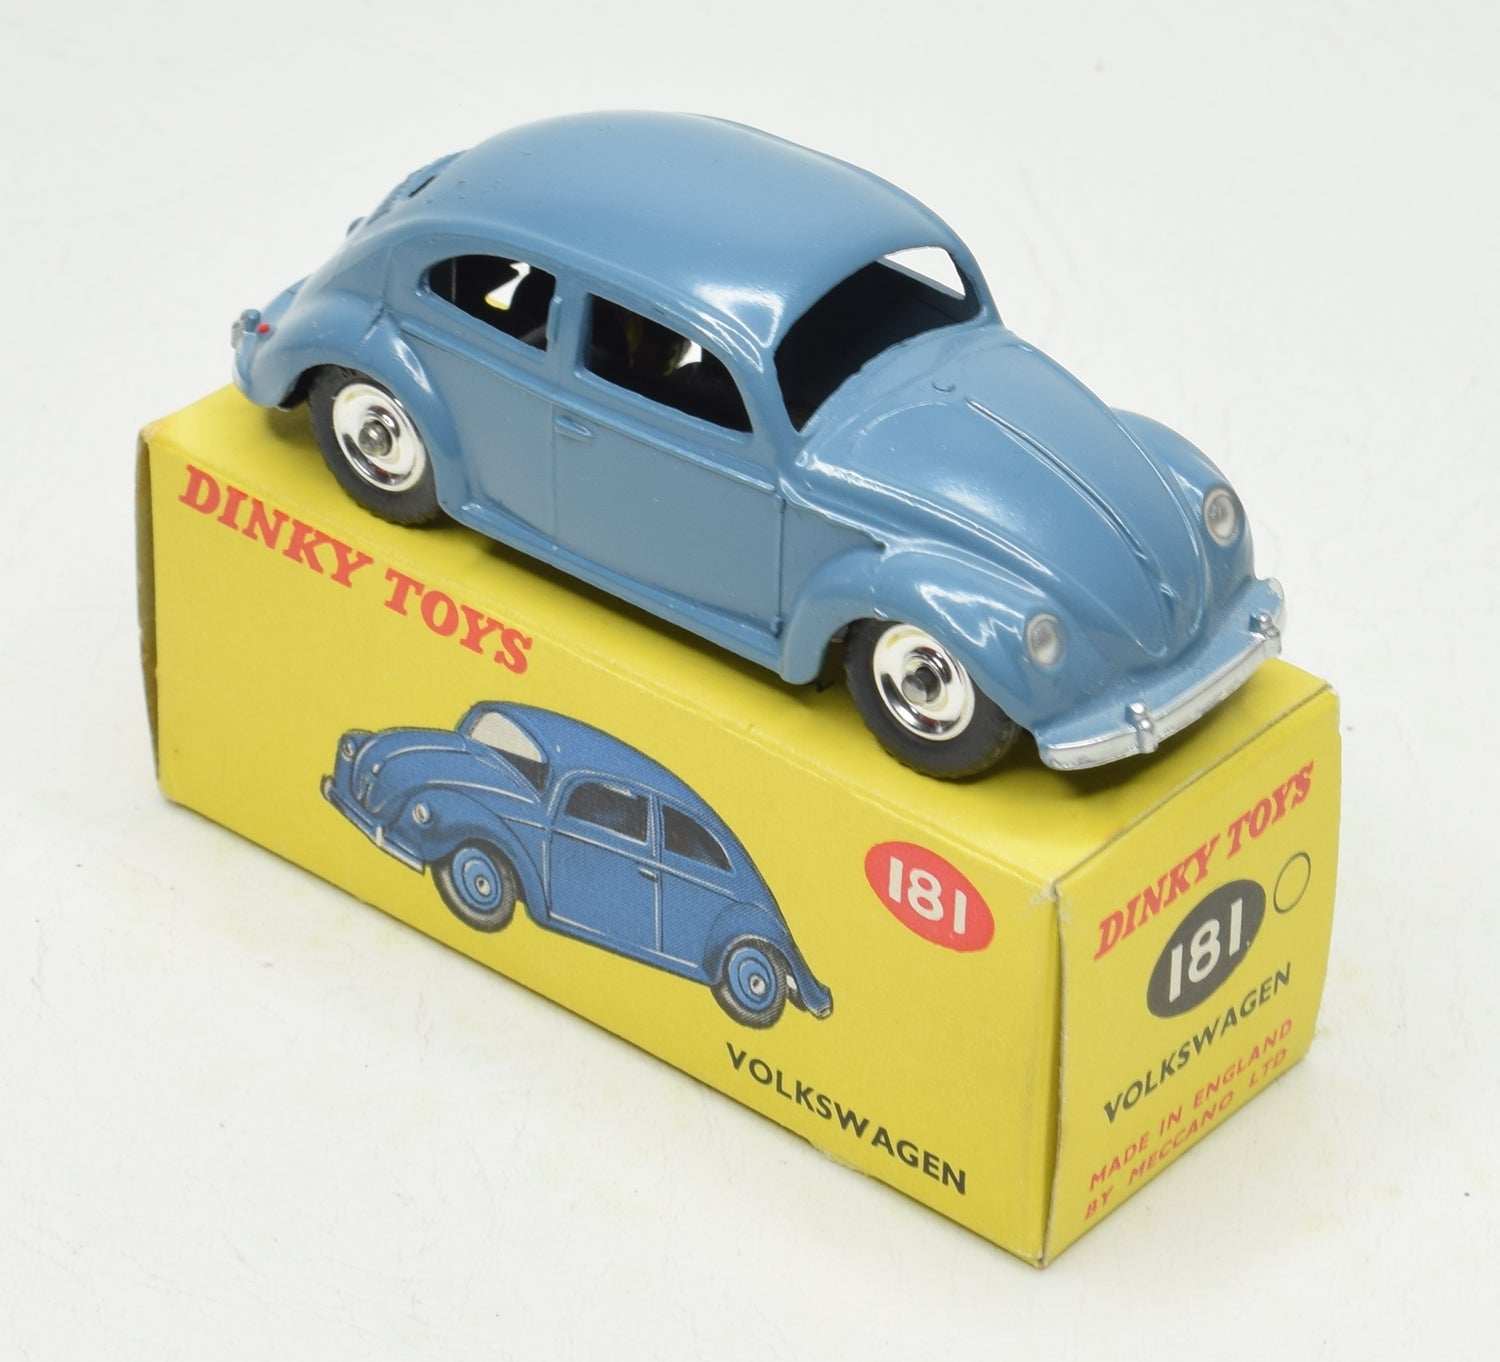 Dinky toy 181 Virtually Mint/Boxed